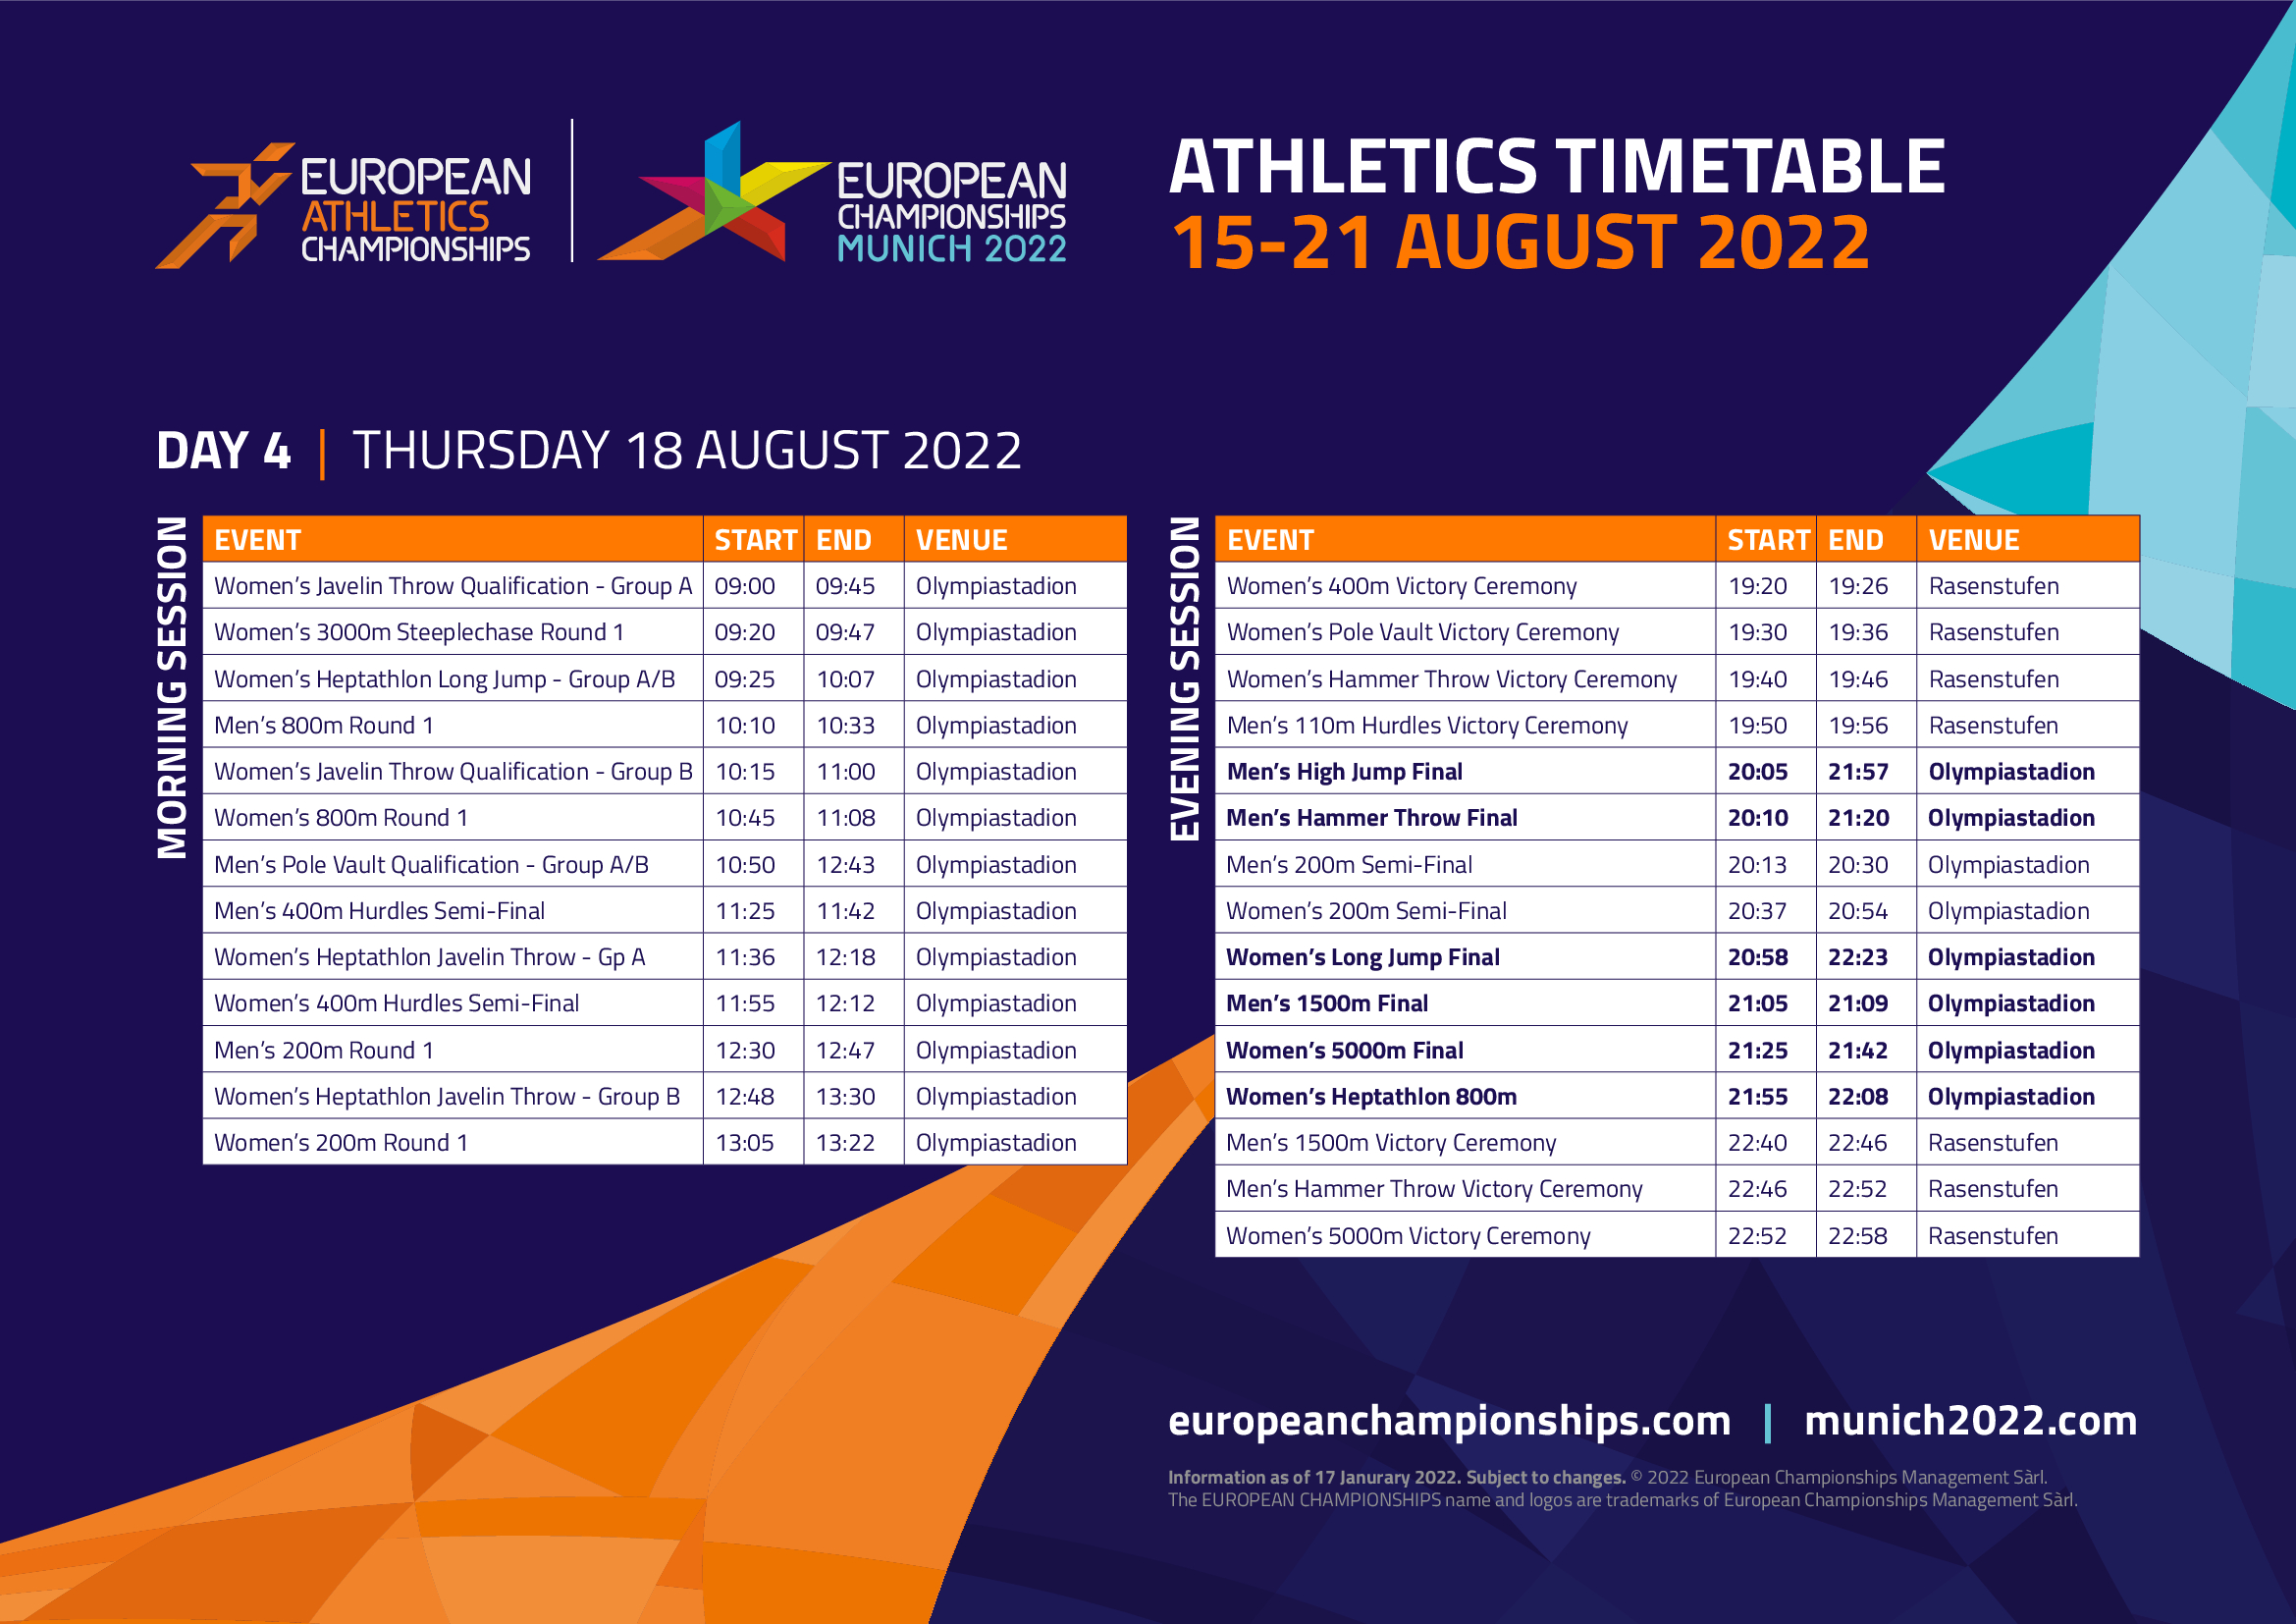 European Athletics Championships 2022 when is it and where is it held?